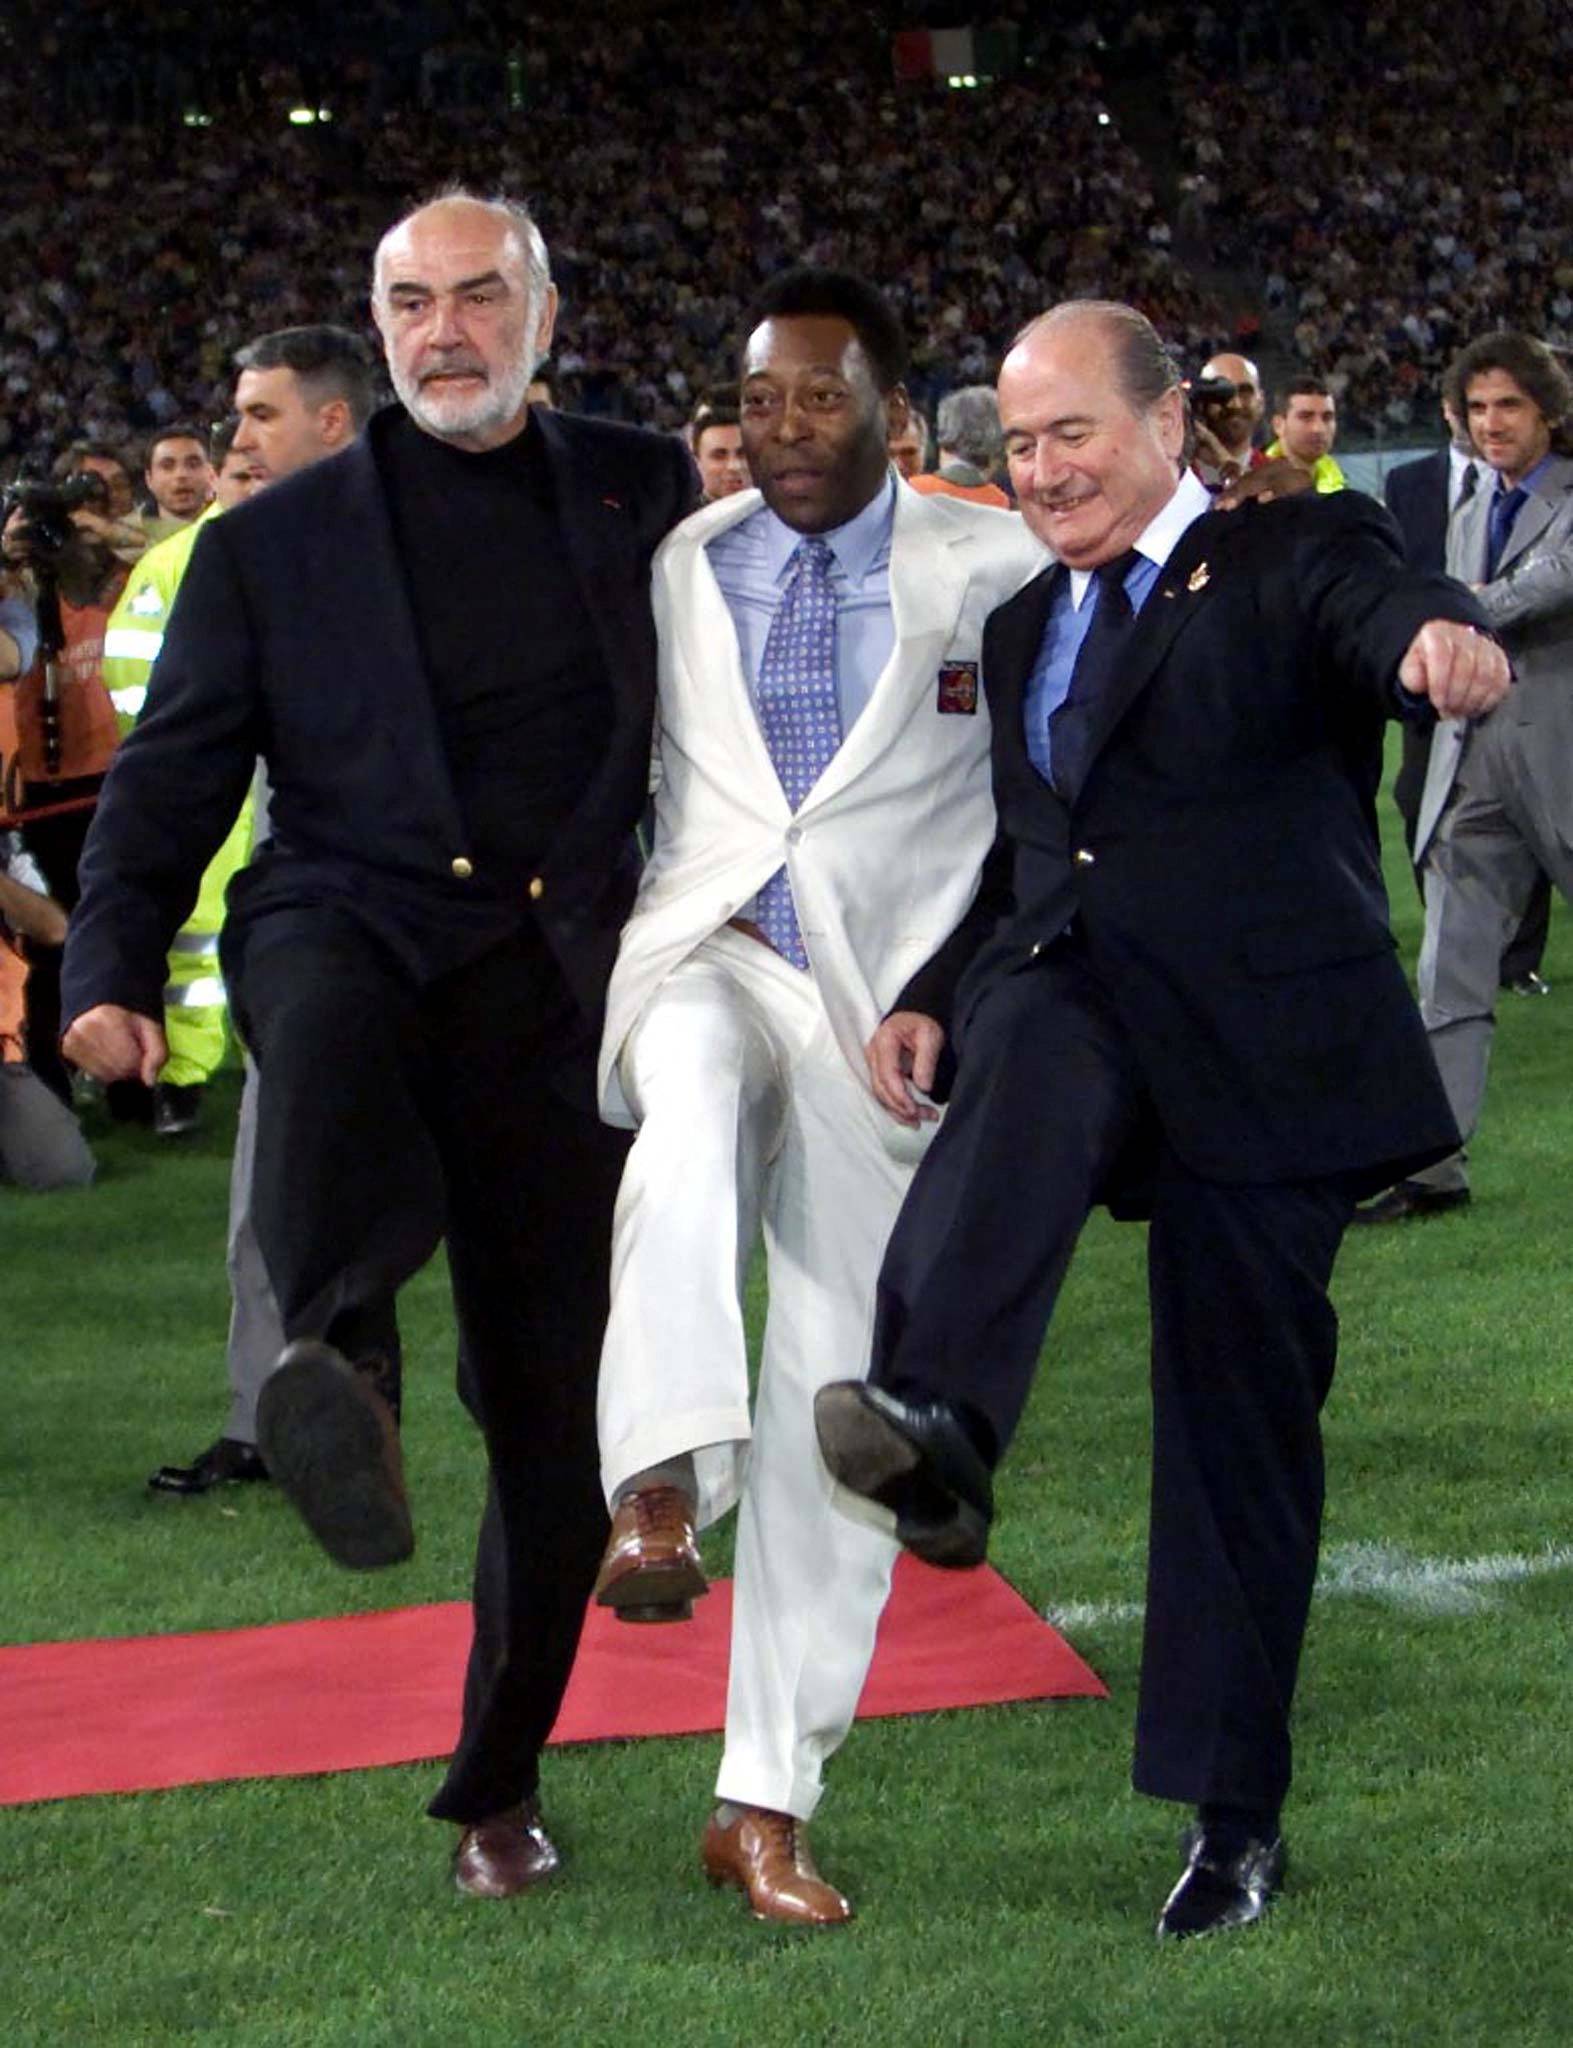 FILE PHOTO: Sepp Blatter, FIFA President, Brazilian soccer star Pele, and actor Sean Connery pose for photographers prior to the start of a charity soccer match in Rome